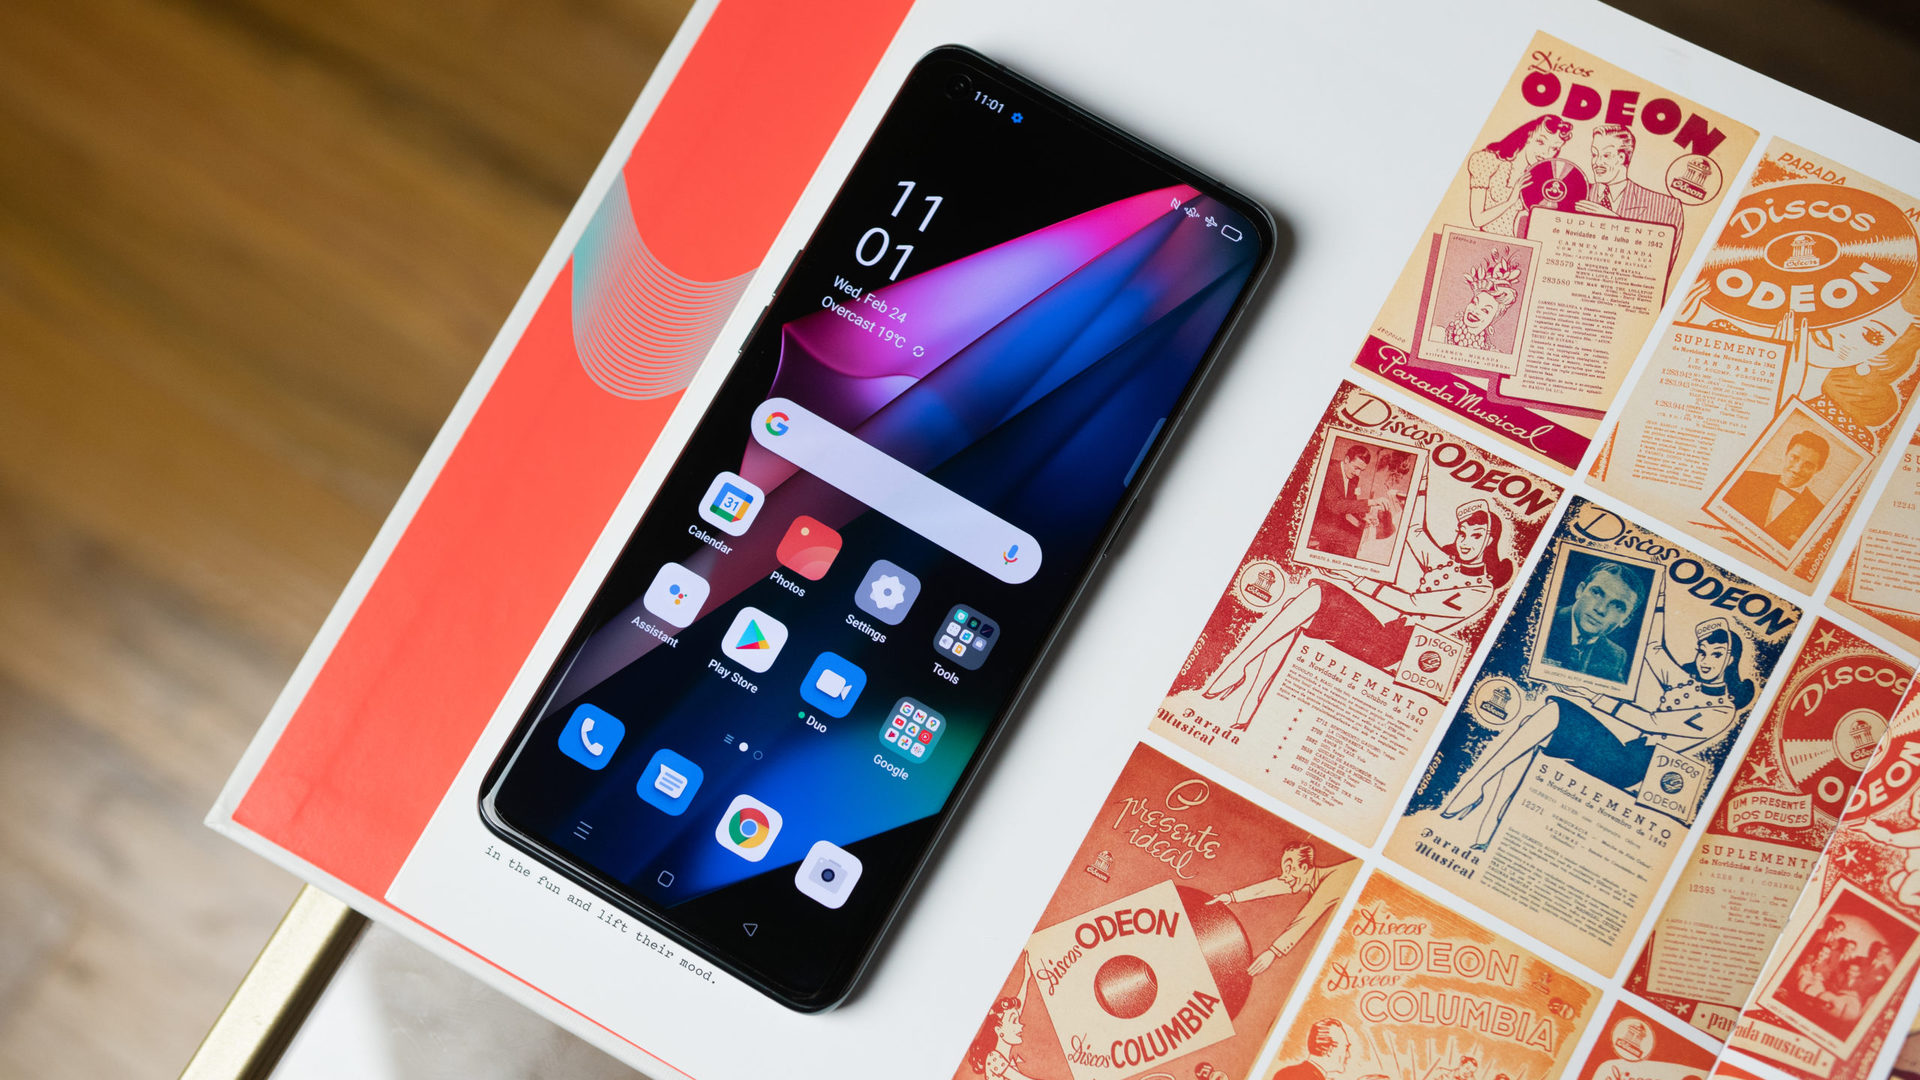 OPPO Find X3 Pro 5G flat on a colorful red and white comicstrip book.